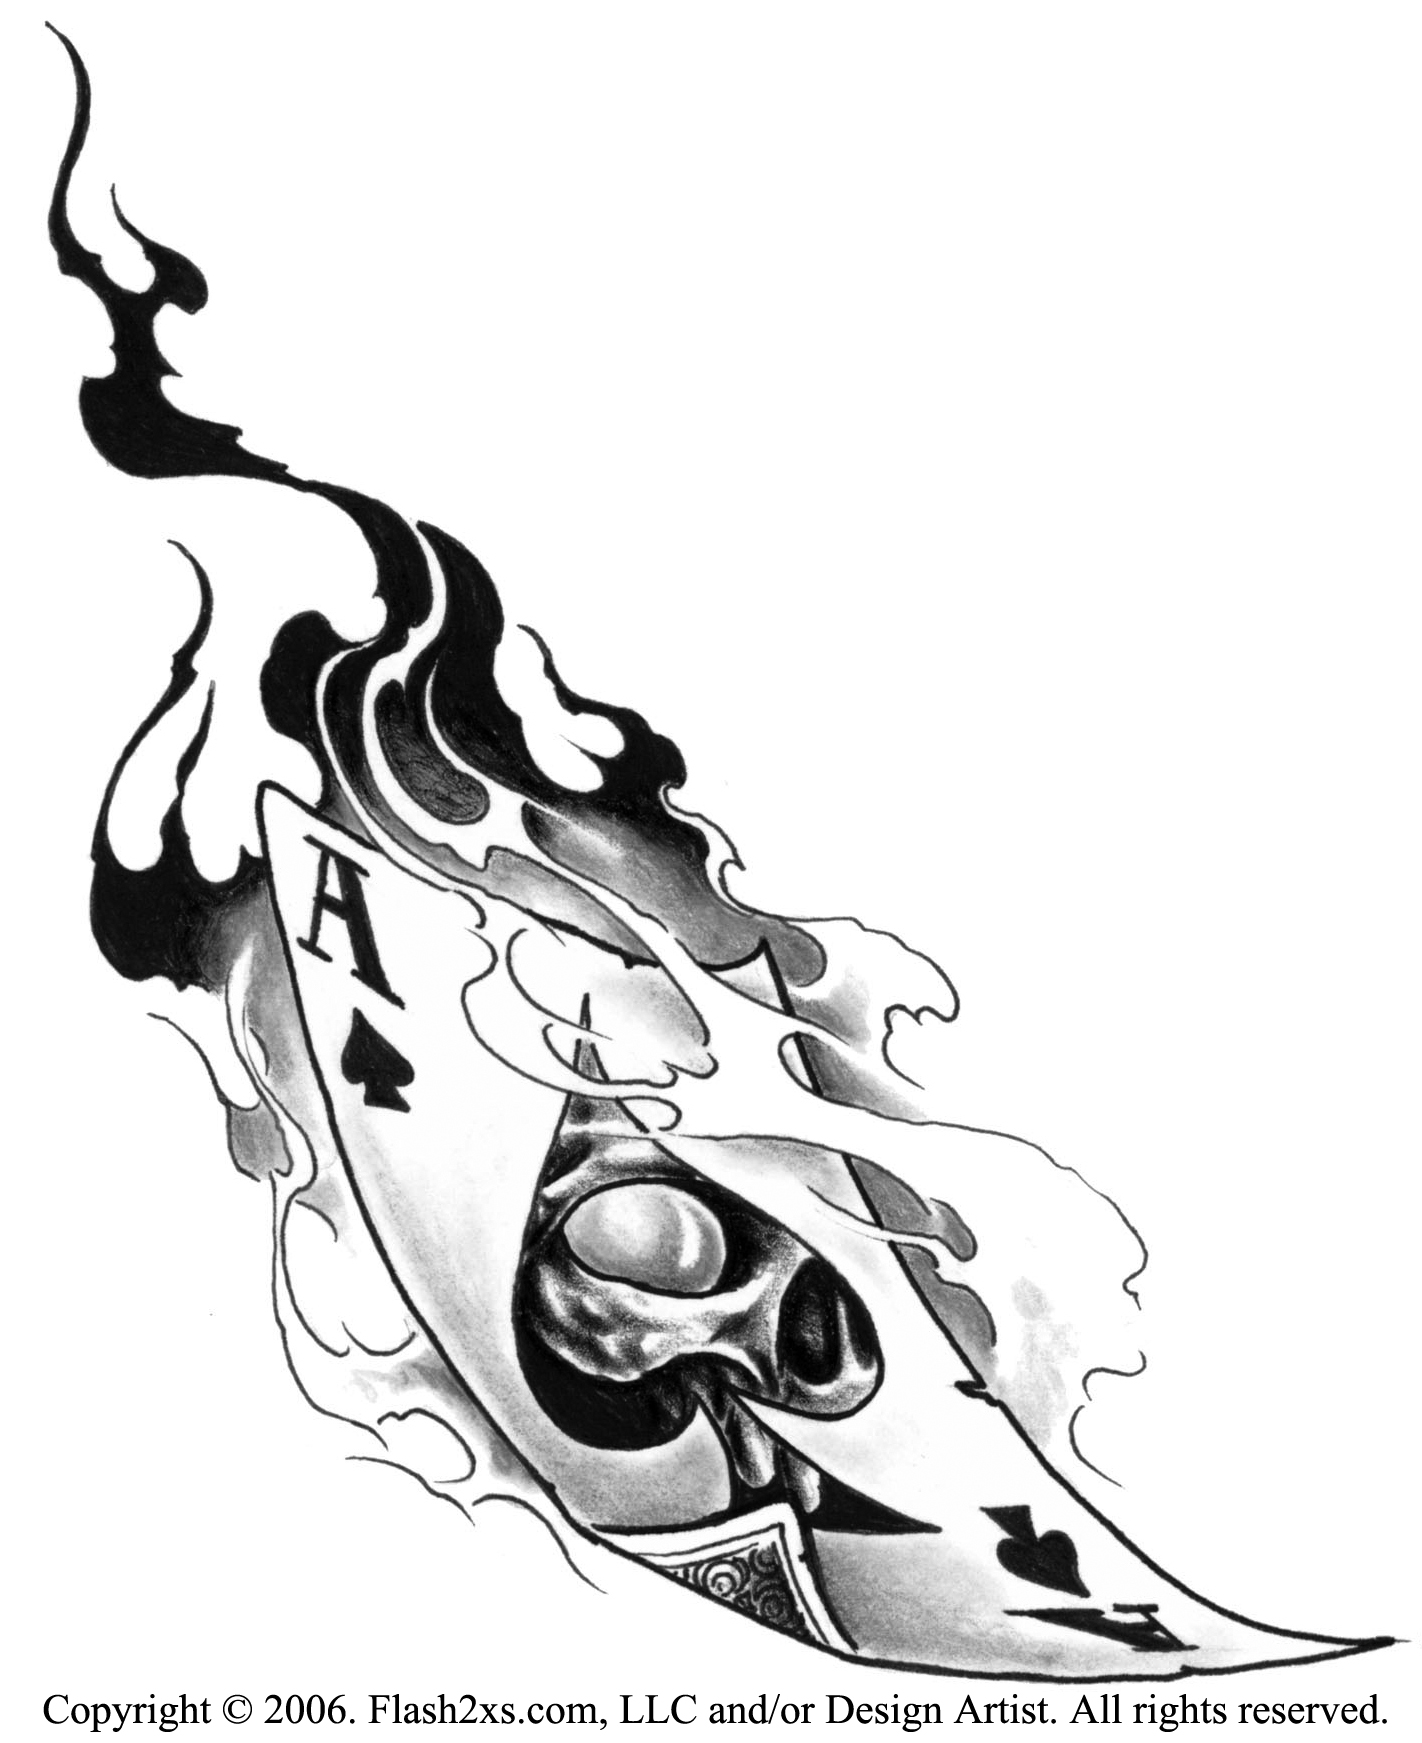 Free Tattoo Designs, Download Free Tattoo Designs png images, Free ClipArts  on Clipart Library